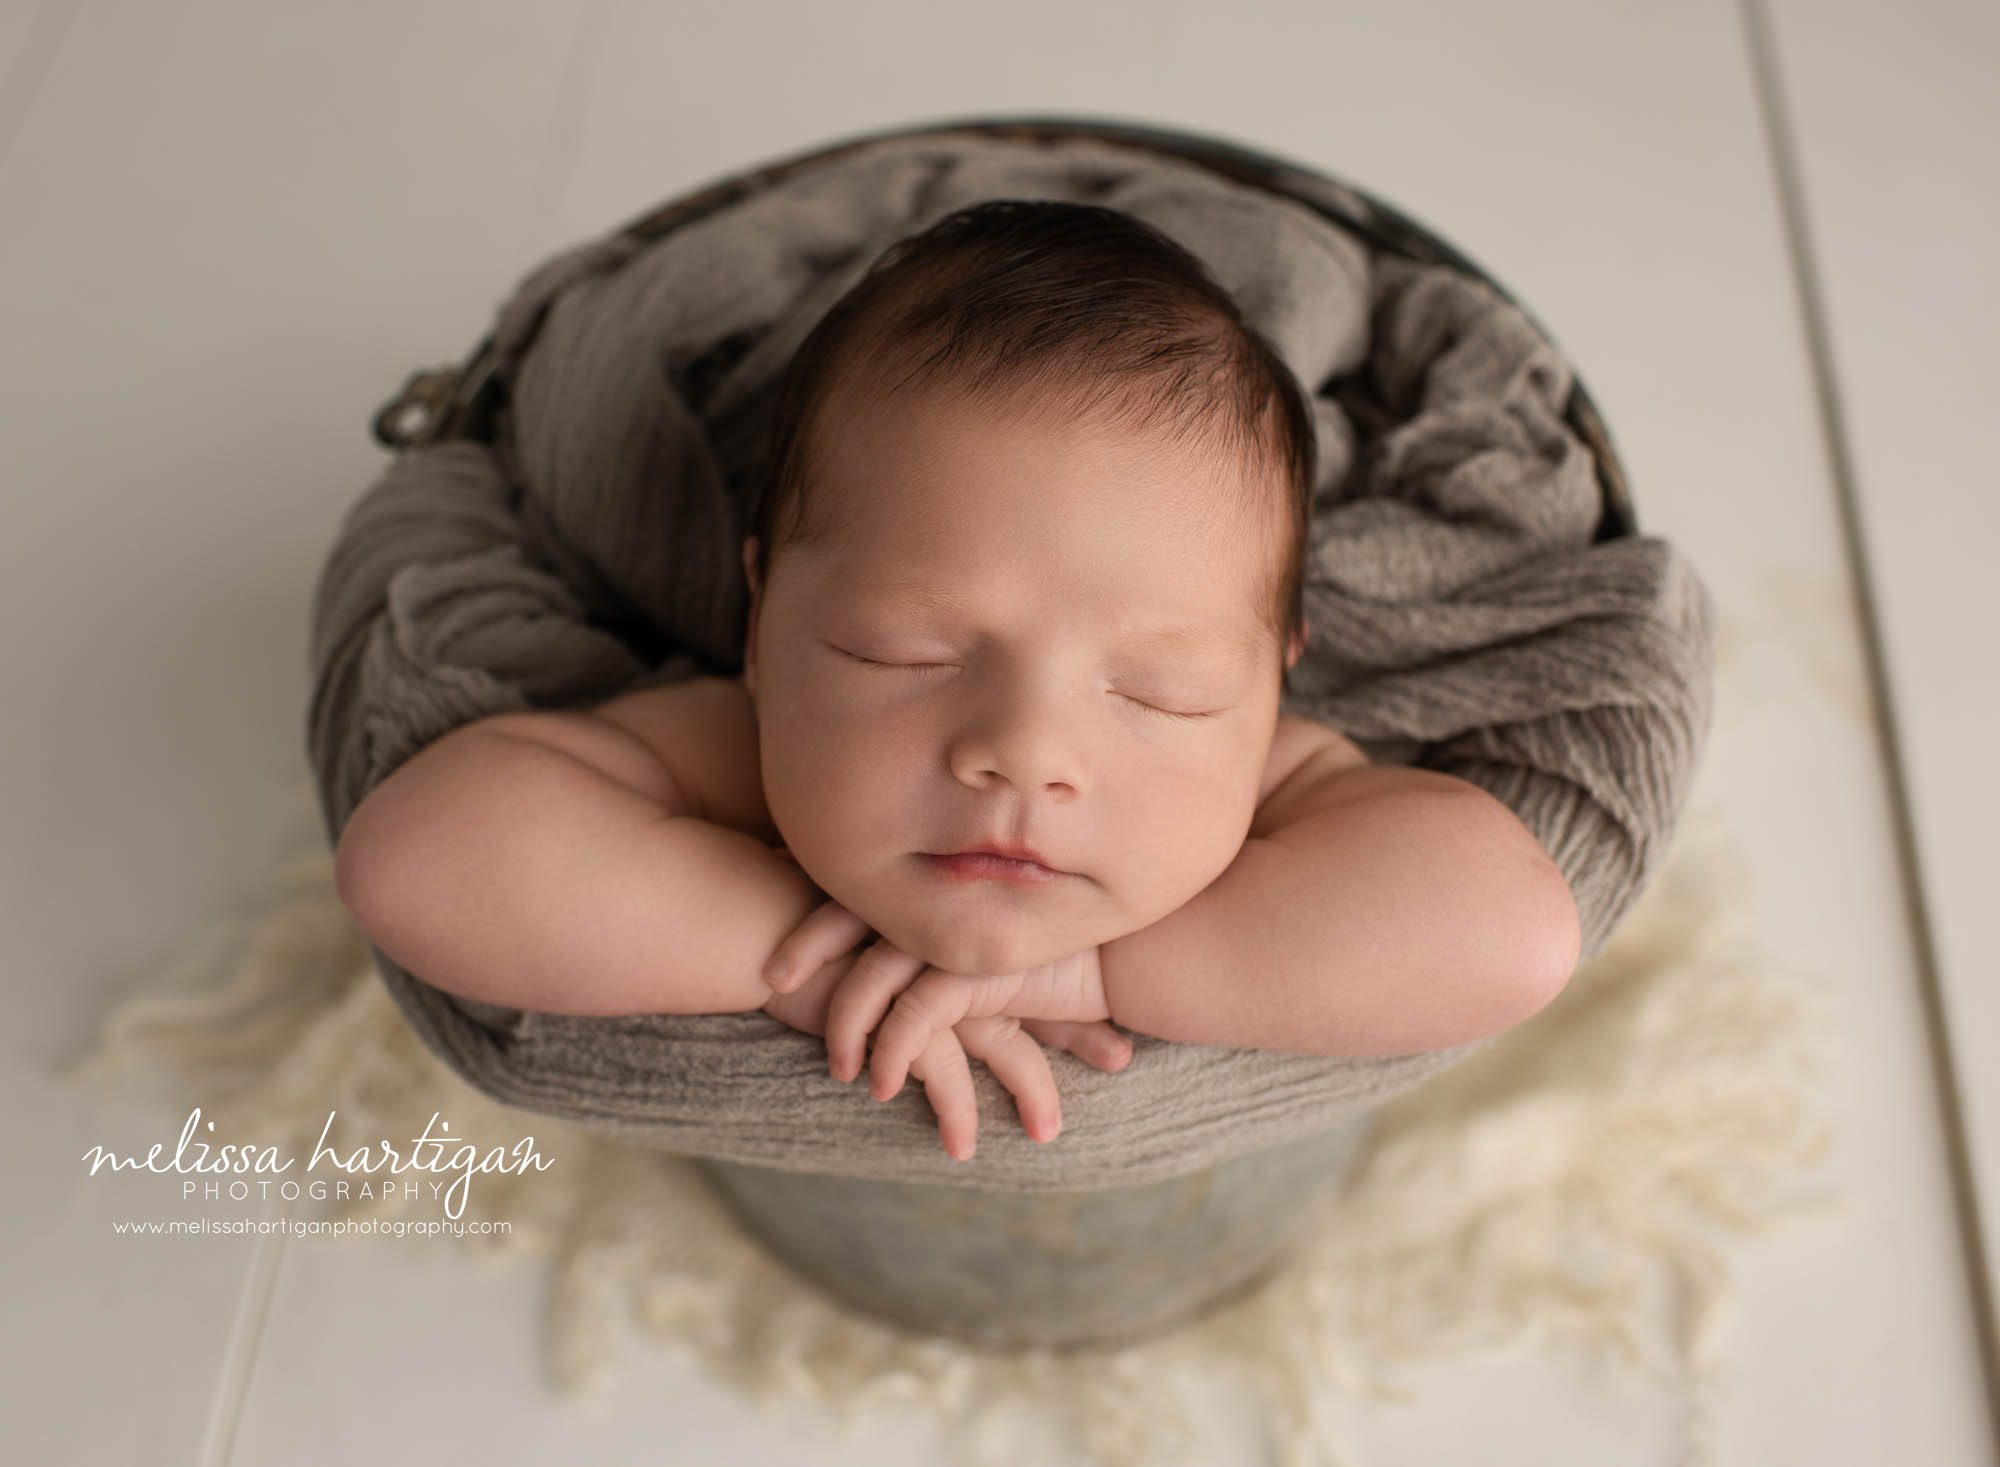 newborn baby boy posed in bucket with gray draping wrap